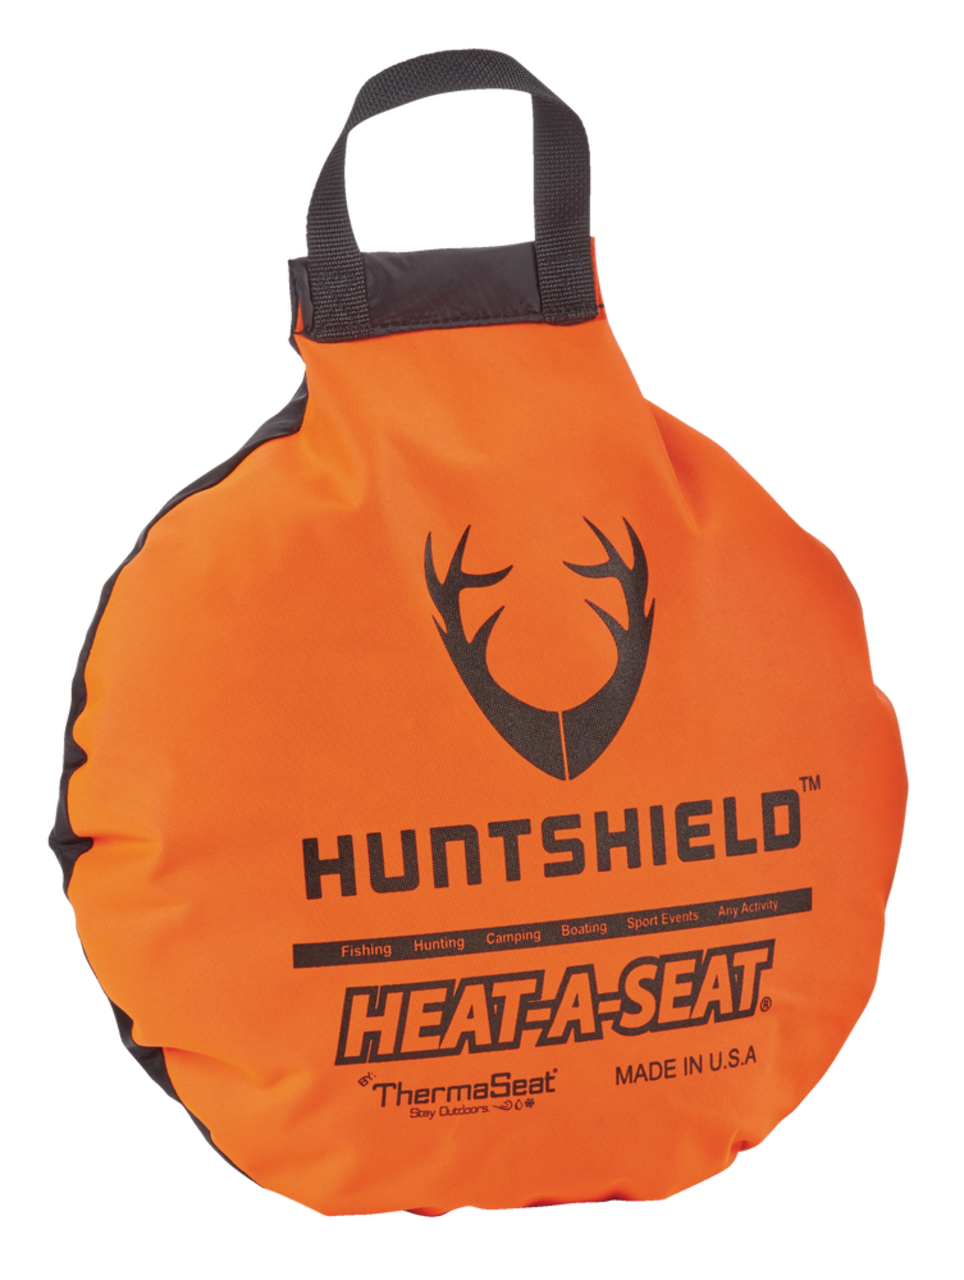 https://media-www.canadiantire.ca/product/playing/hunting/hunting-accessories/0750012/hot-seat-camo-blaze-reversible-4c33edcd-9b6c-44dd-bdd3-844f6b422ad7.png?imdensity=1&imwidth=640&impolicy=mZoom